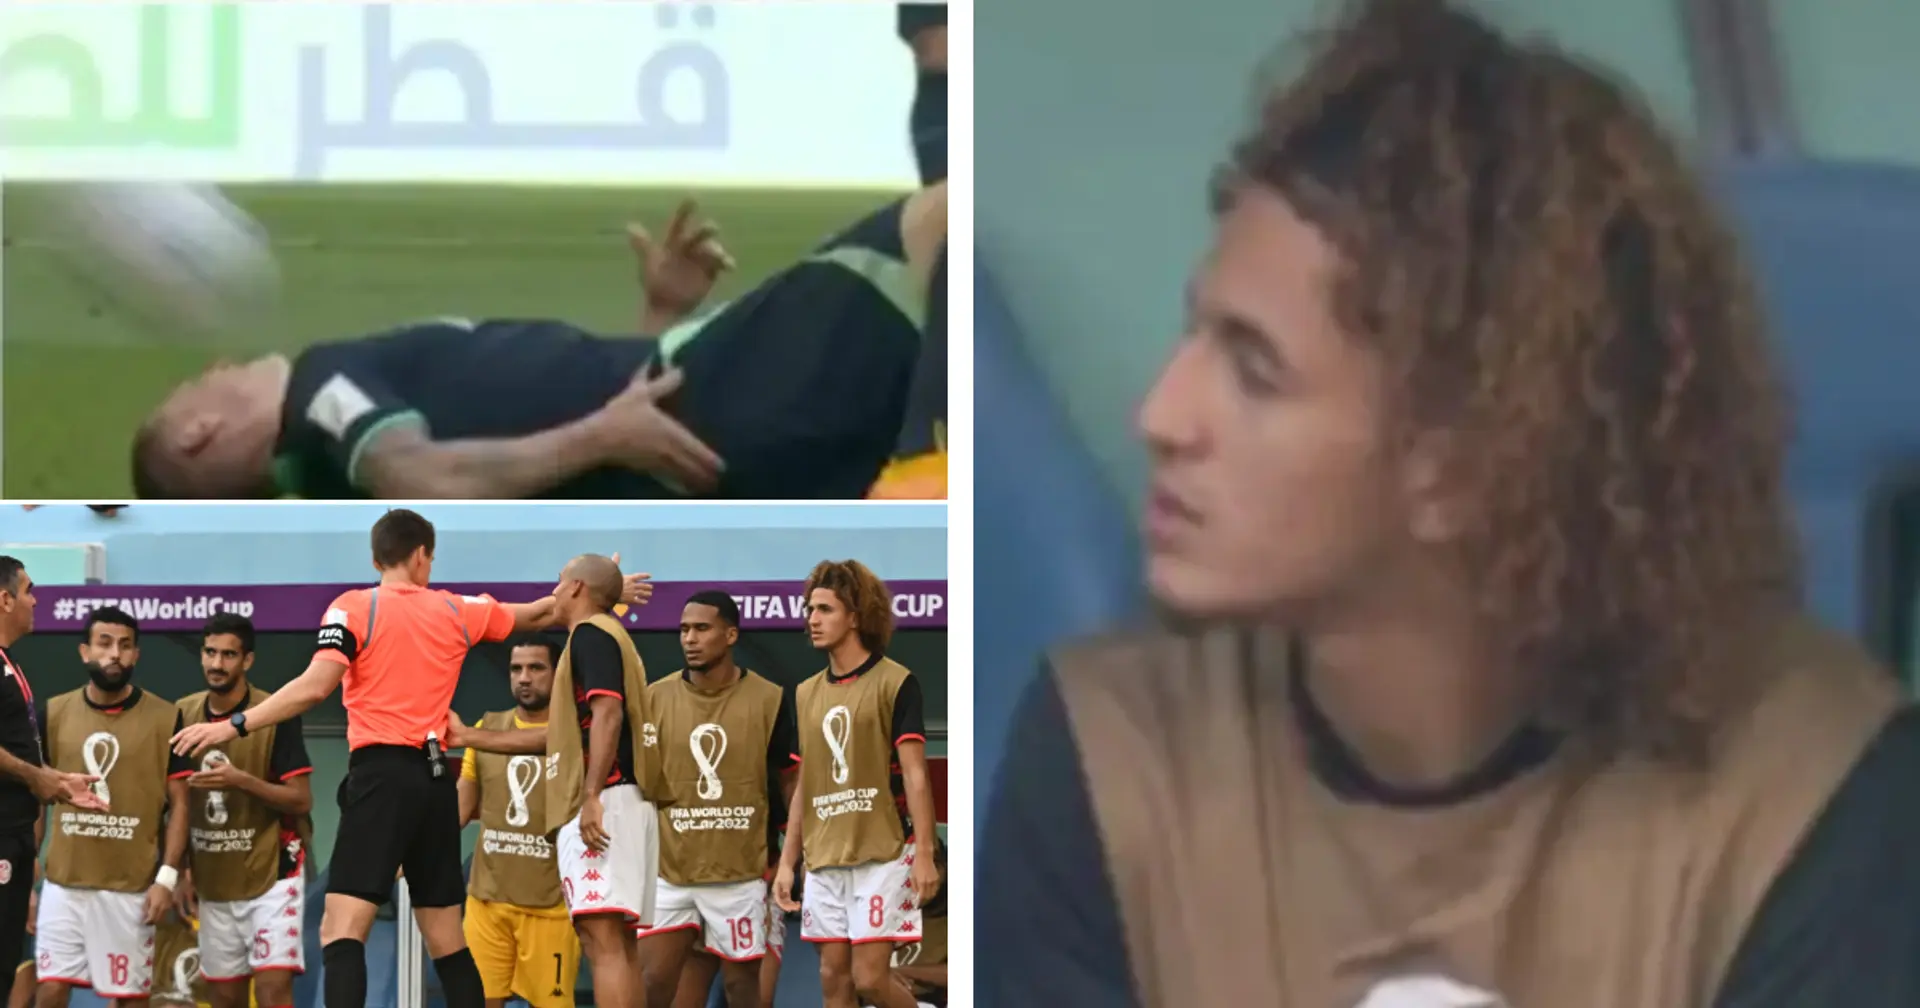 Hannibal Mejbri escapes punishment after slamming ball into Australian player's face